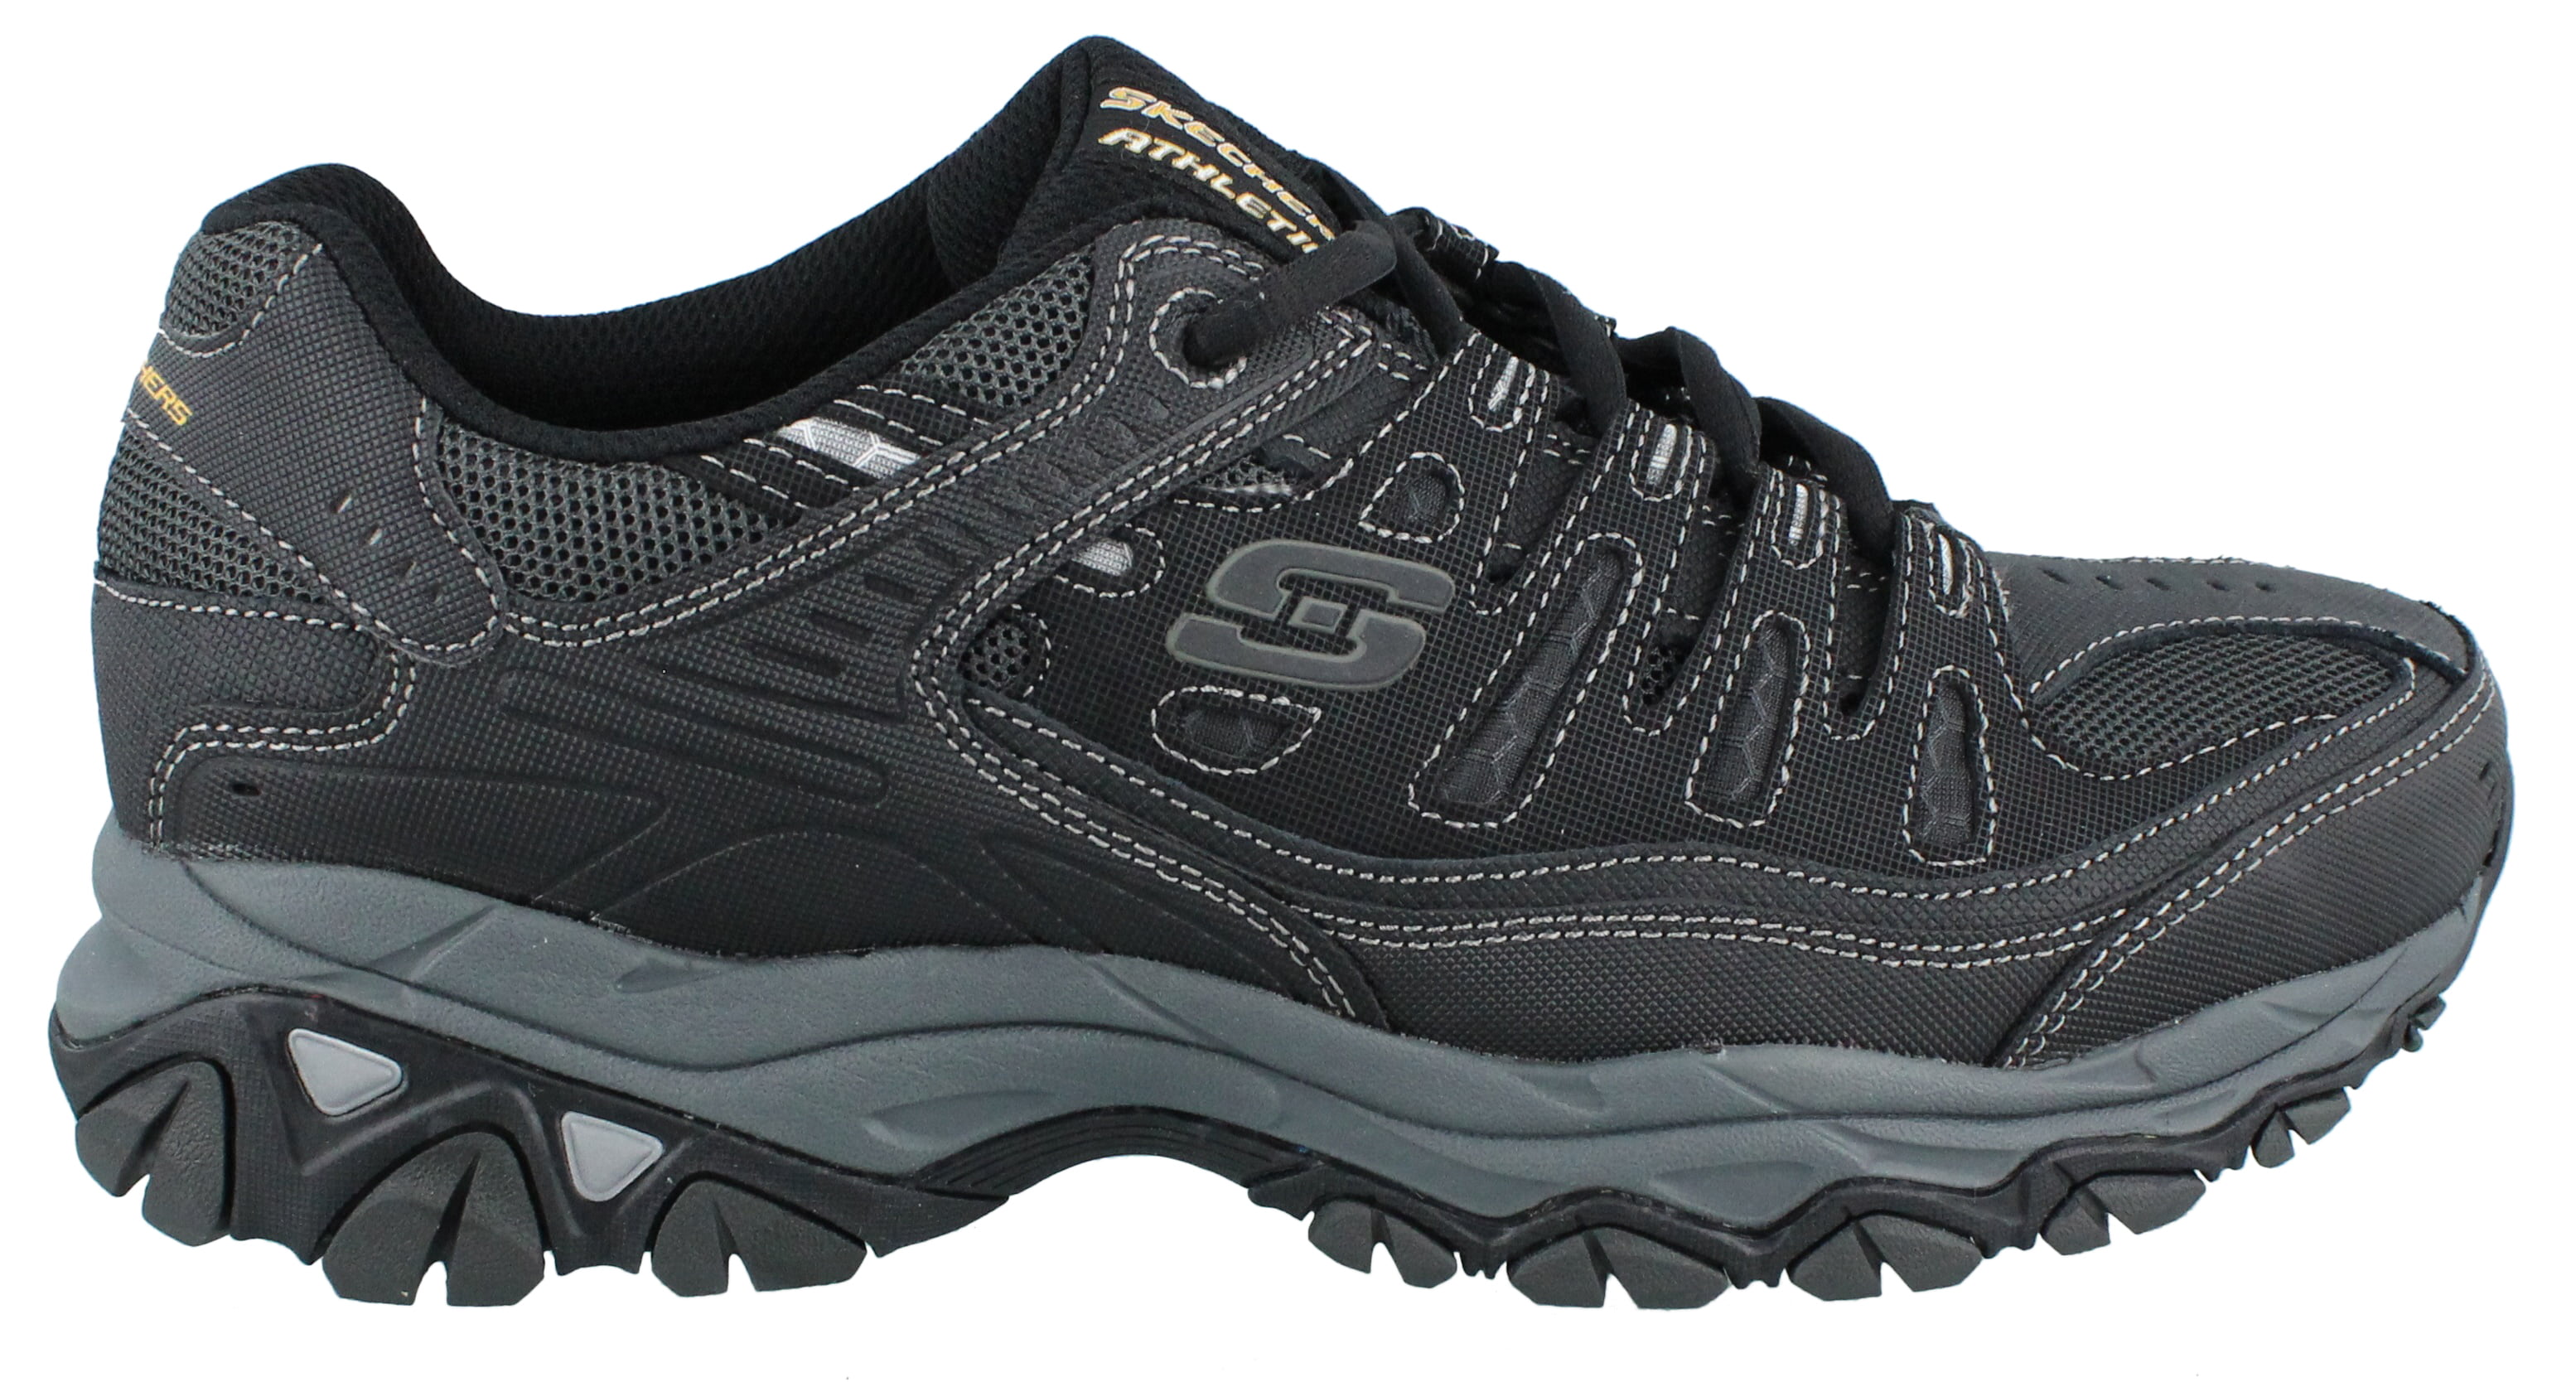 Simple Are skechers good workout shoes for Push Pull Legs